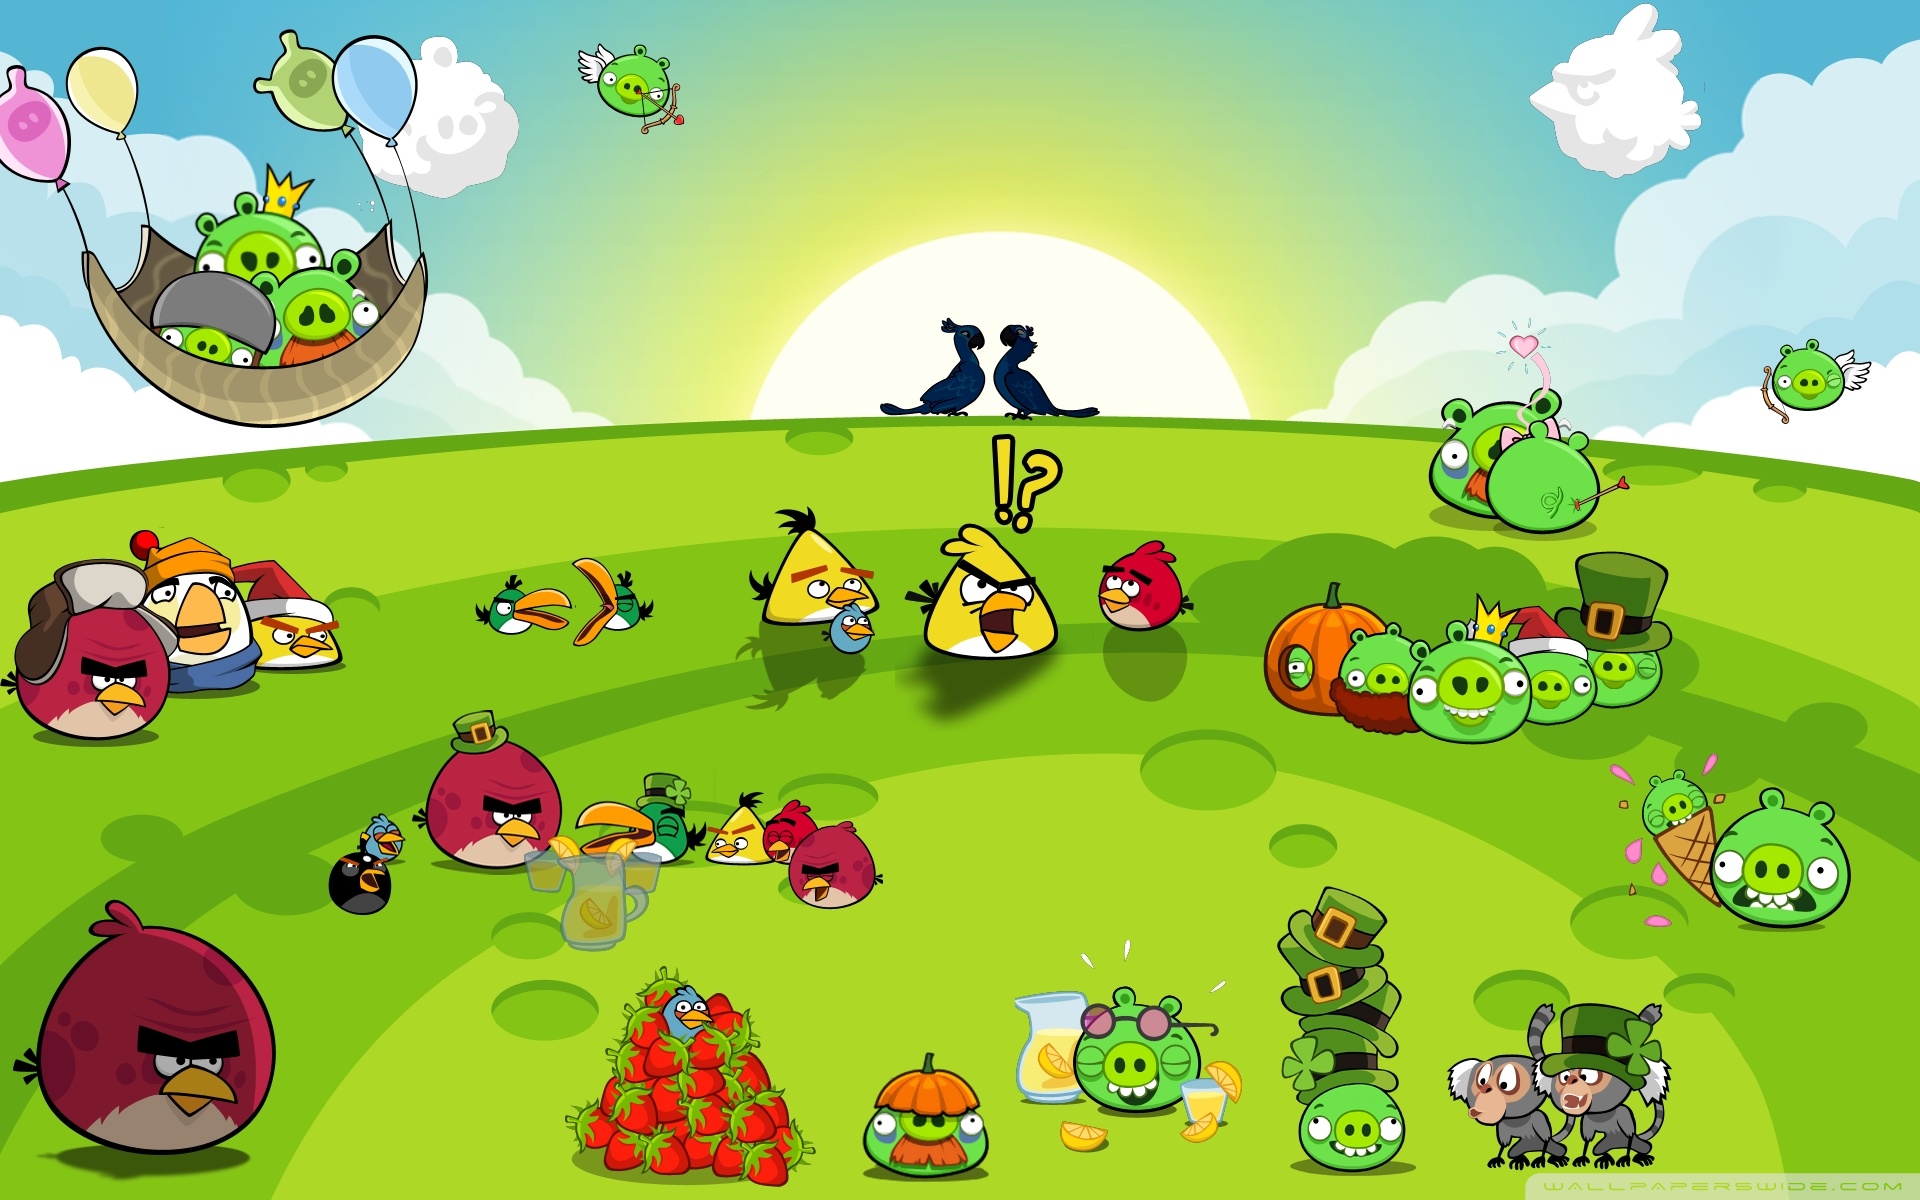 Download Angry Birds Hd Widescreen Wallpaper Full HD Wallpapers 1920x1200